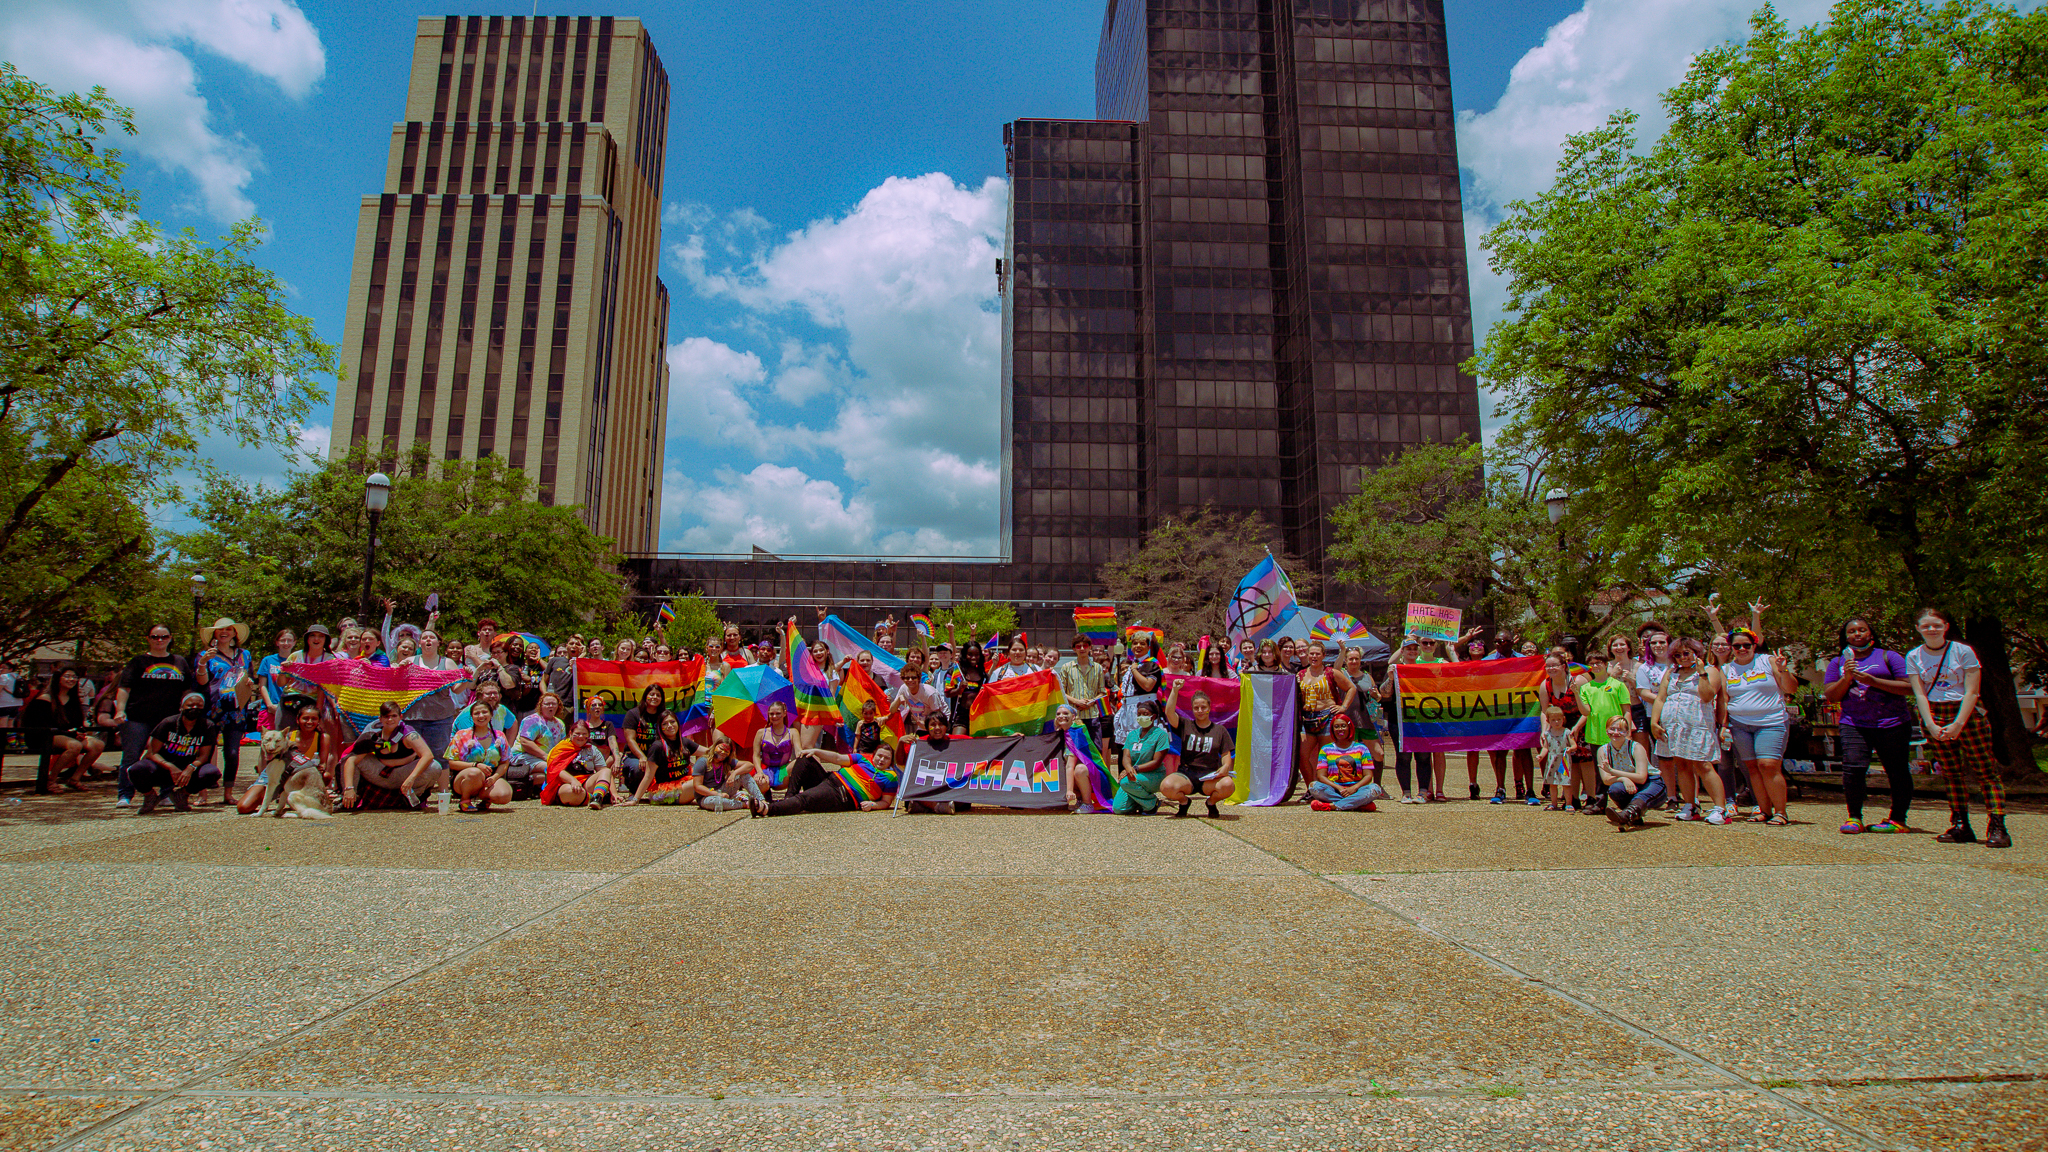 Group Photo at Pride 2021 Taken by Chris French